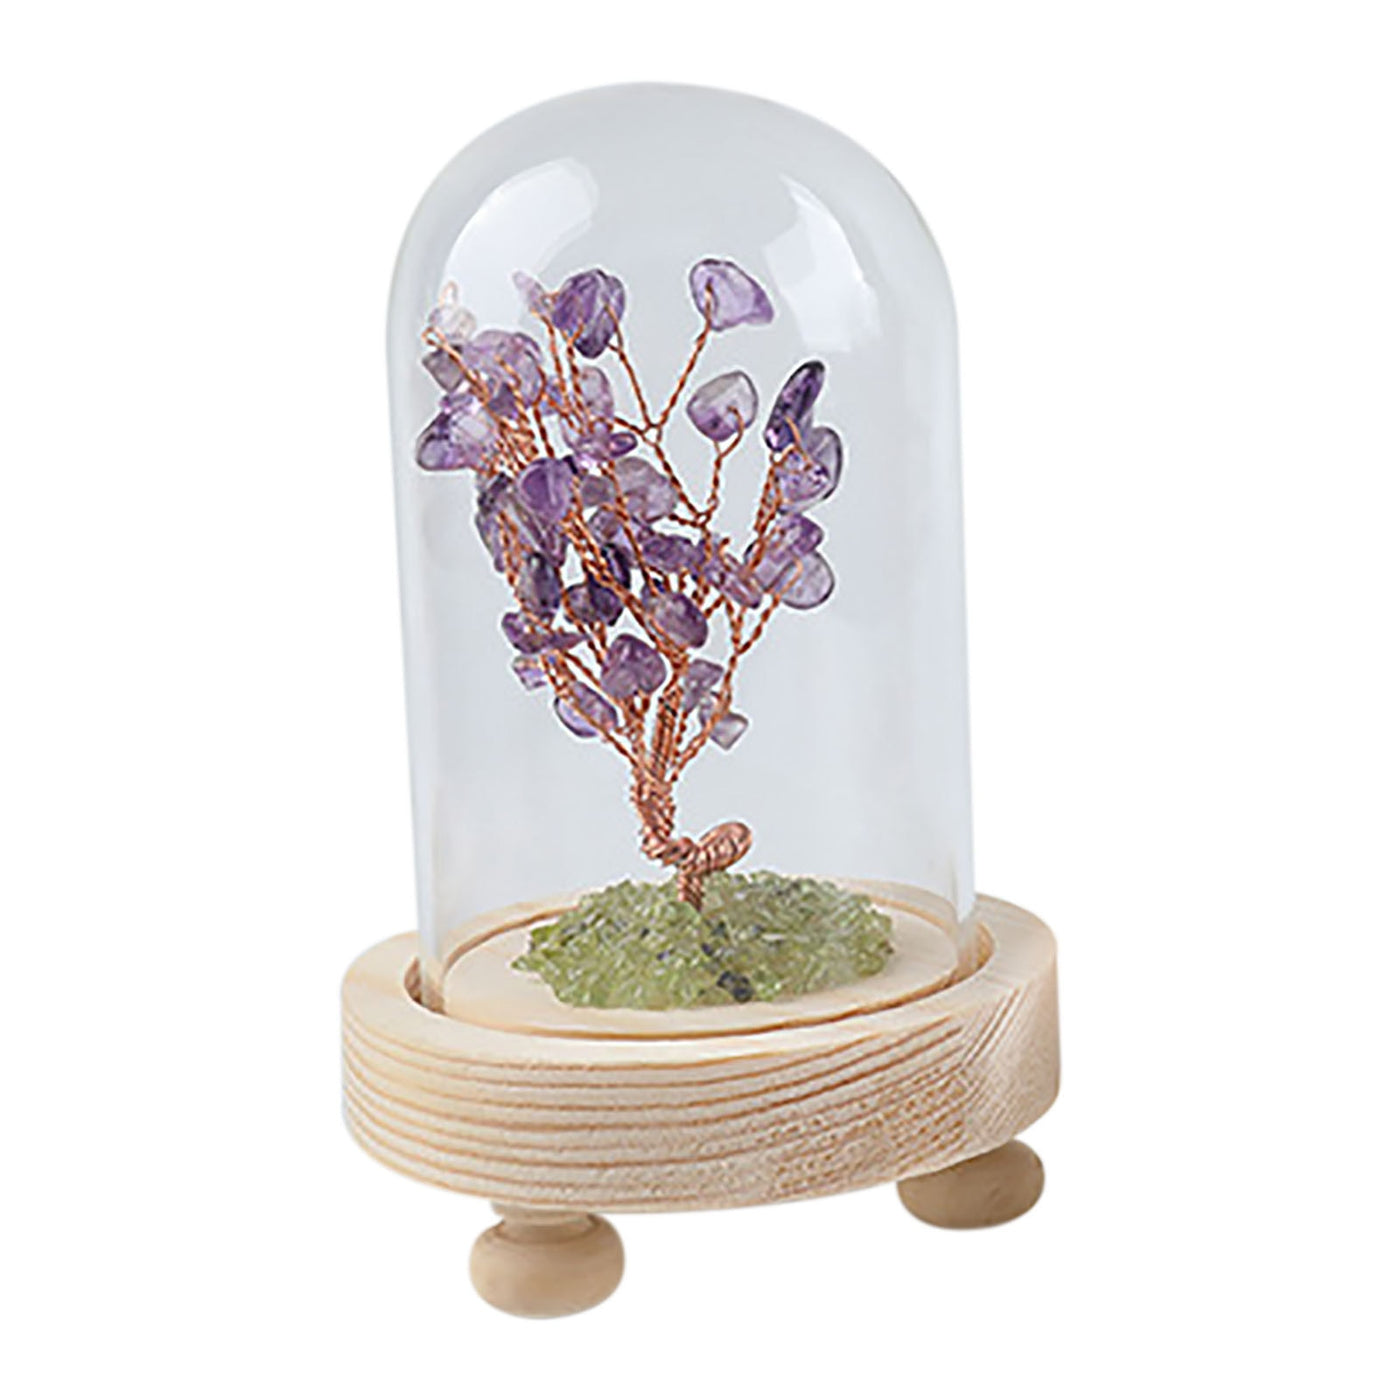 Crystal Money Tree with Glass Cover